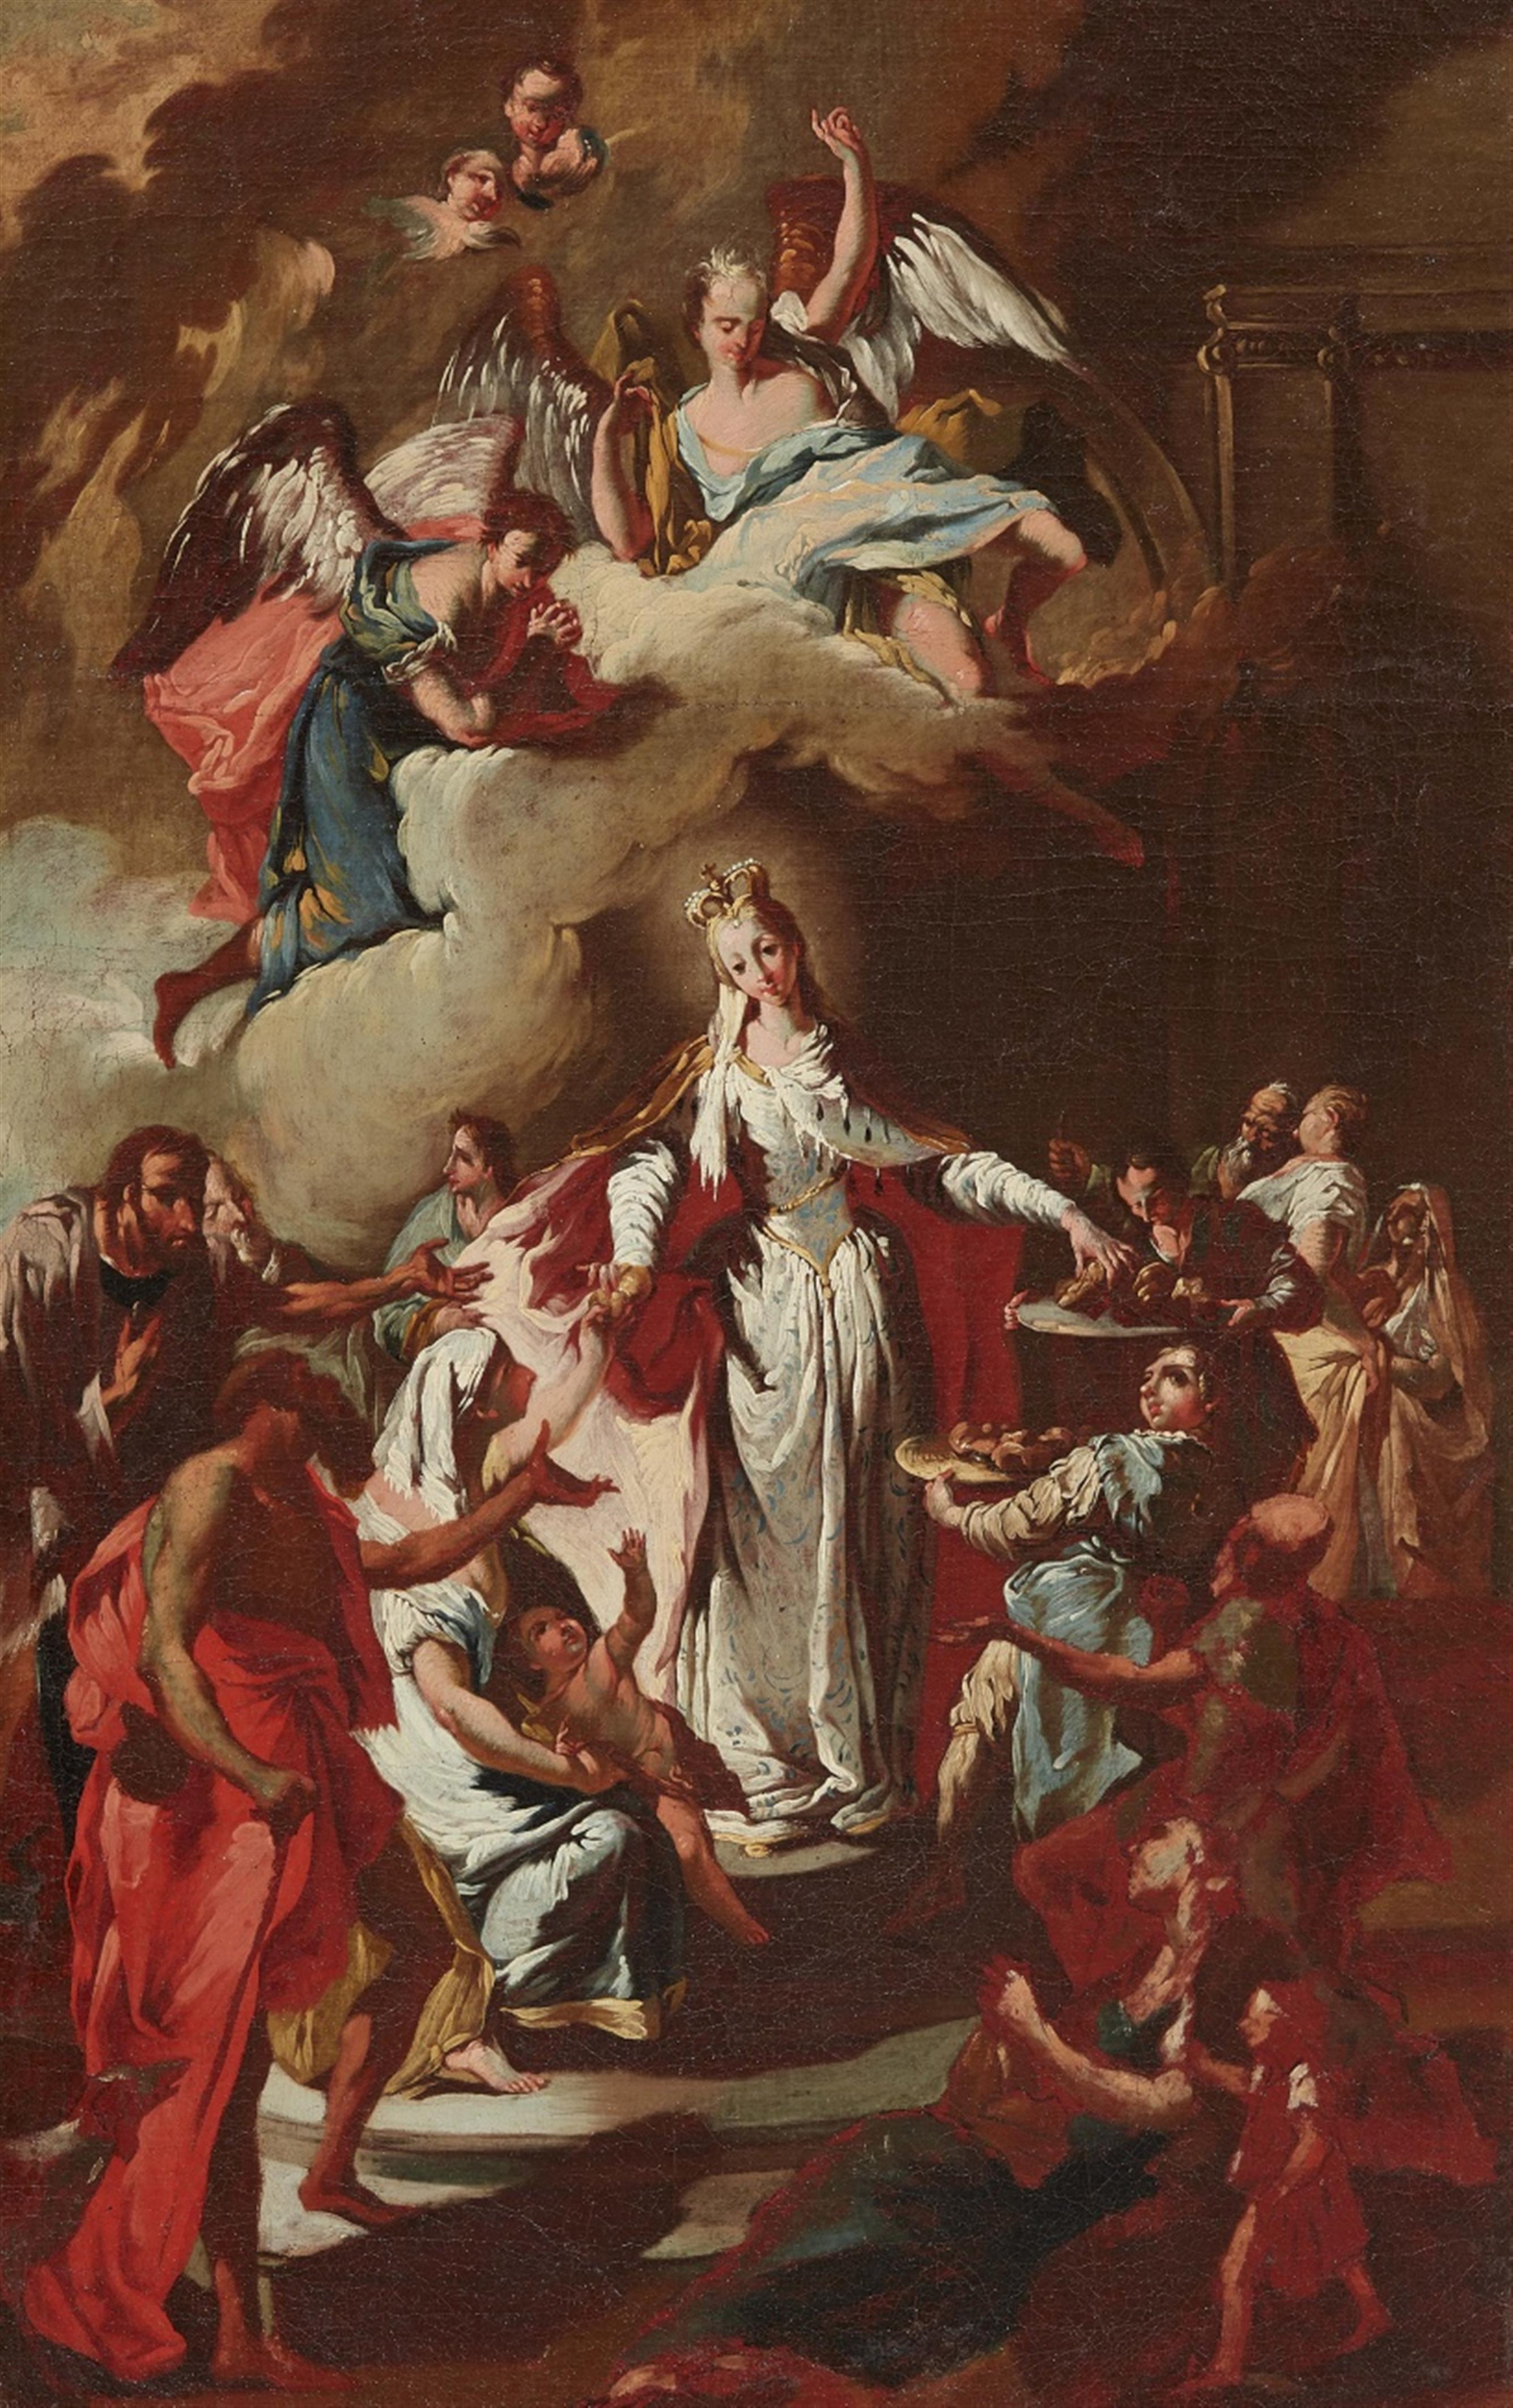 Anton Kern, attributed to - Saint Elizabeth of Thuringia Giving Alms - image-1